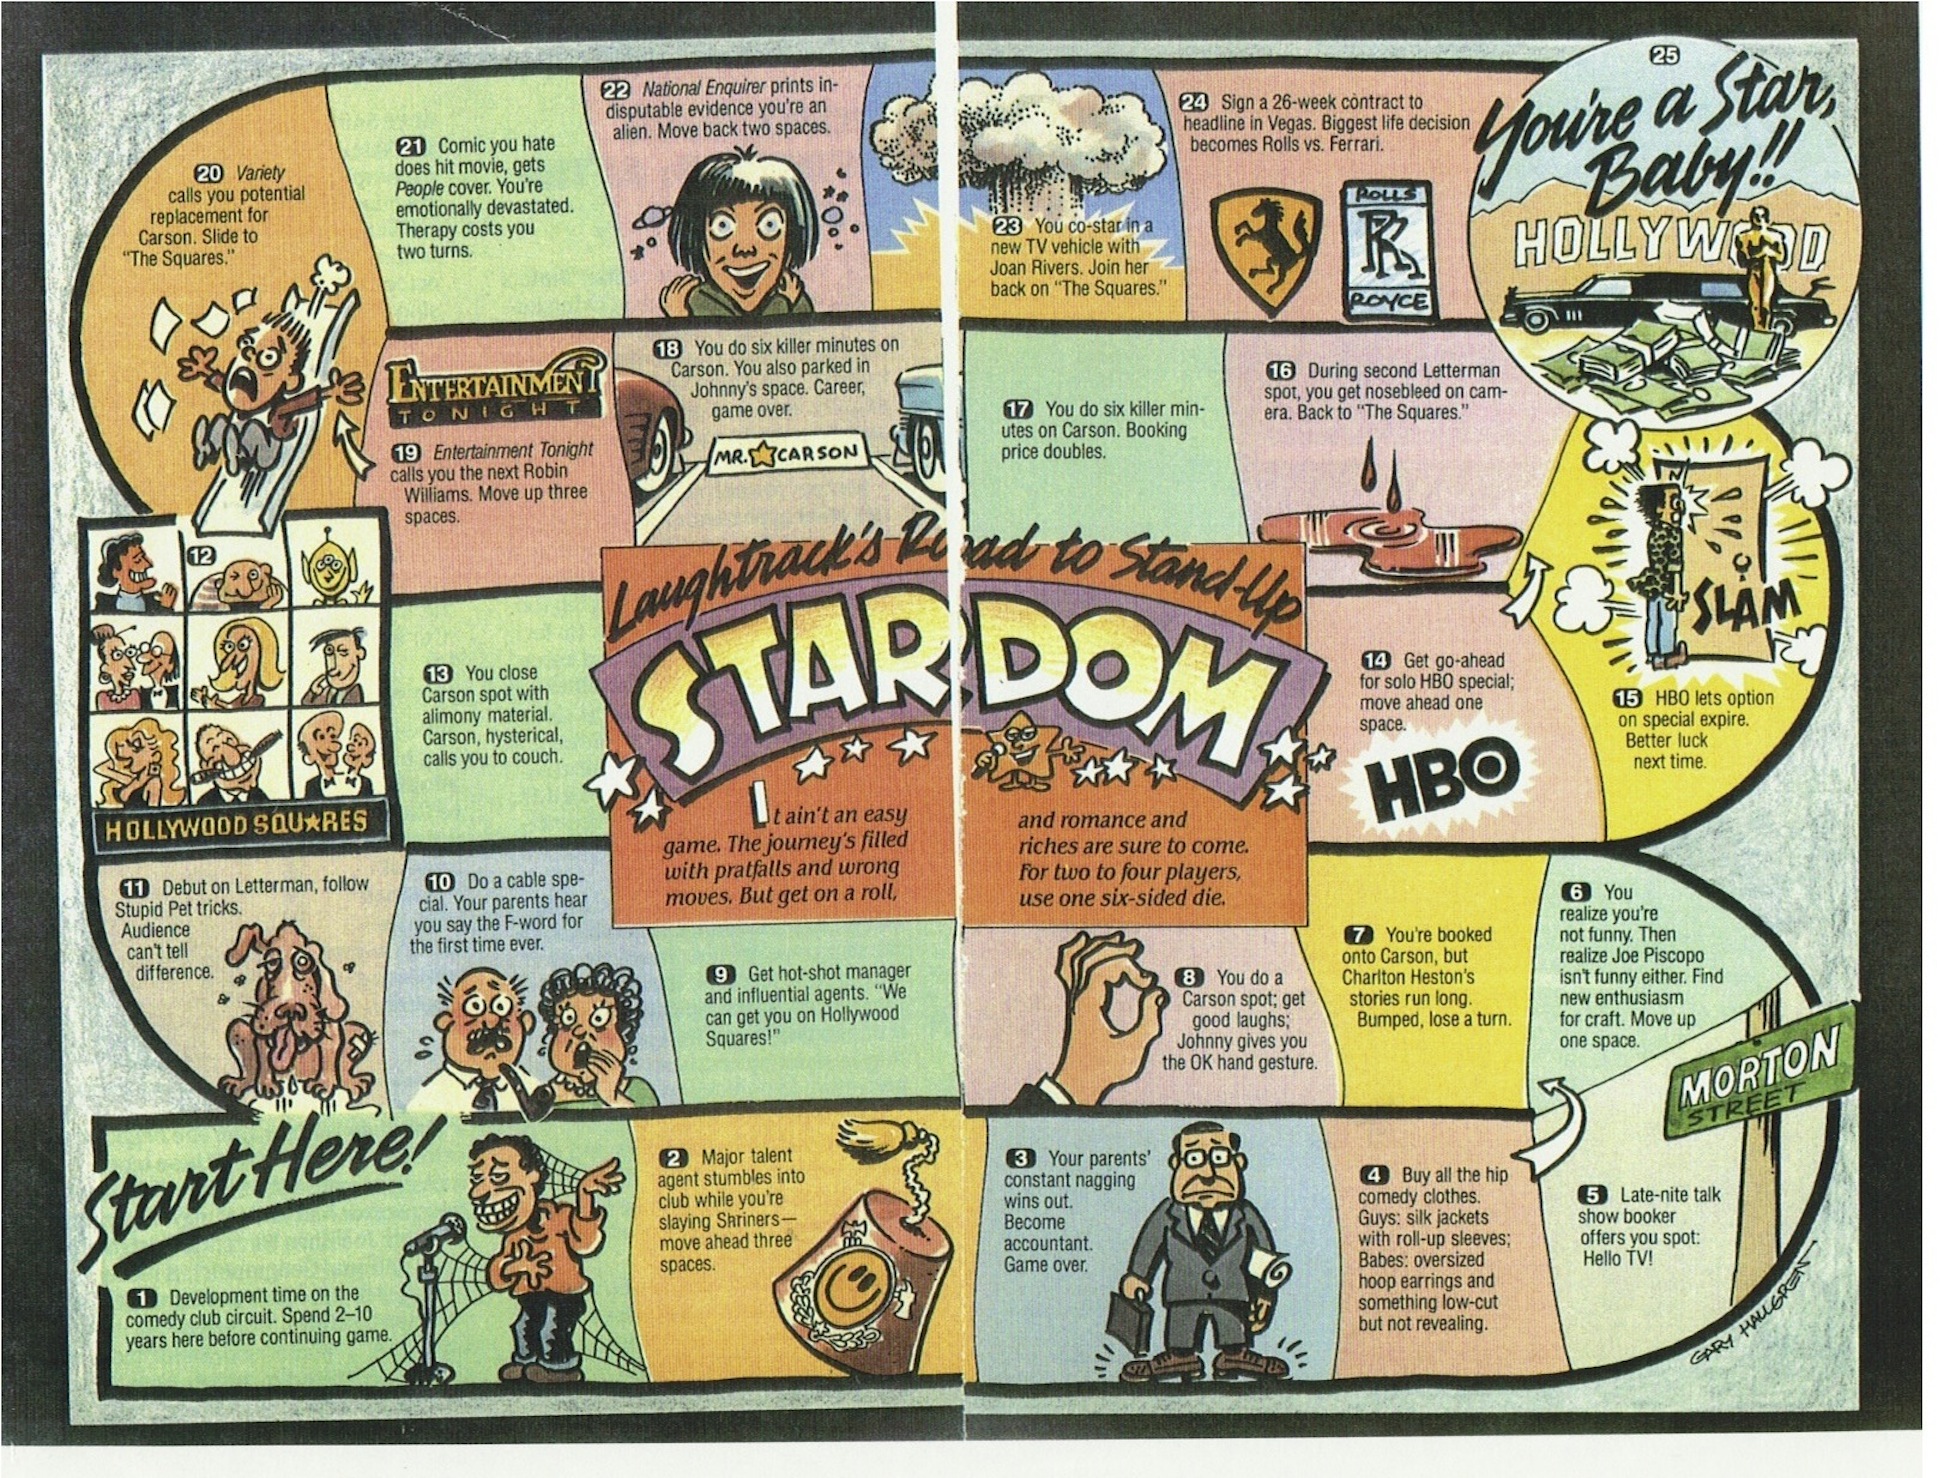 The Road to Stand-Up Stardom, circa 1989, via LaughTrack mag